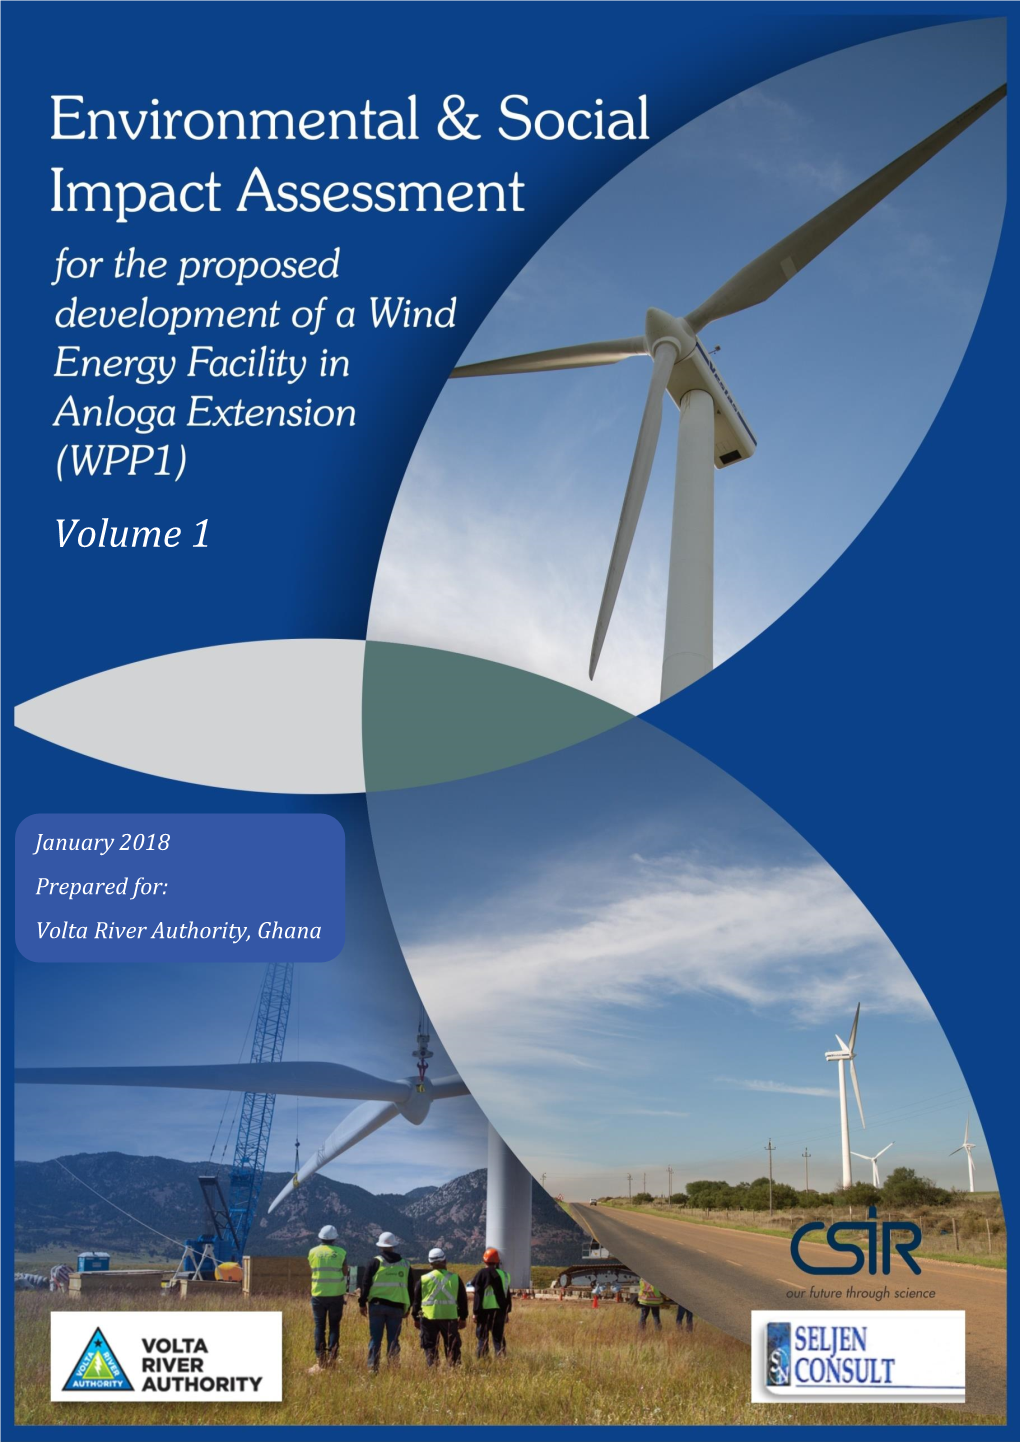 Wind Power Project 1 Draft ESIA Report (Volume 1)